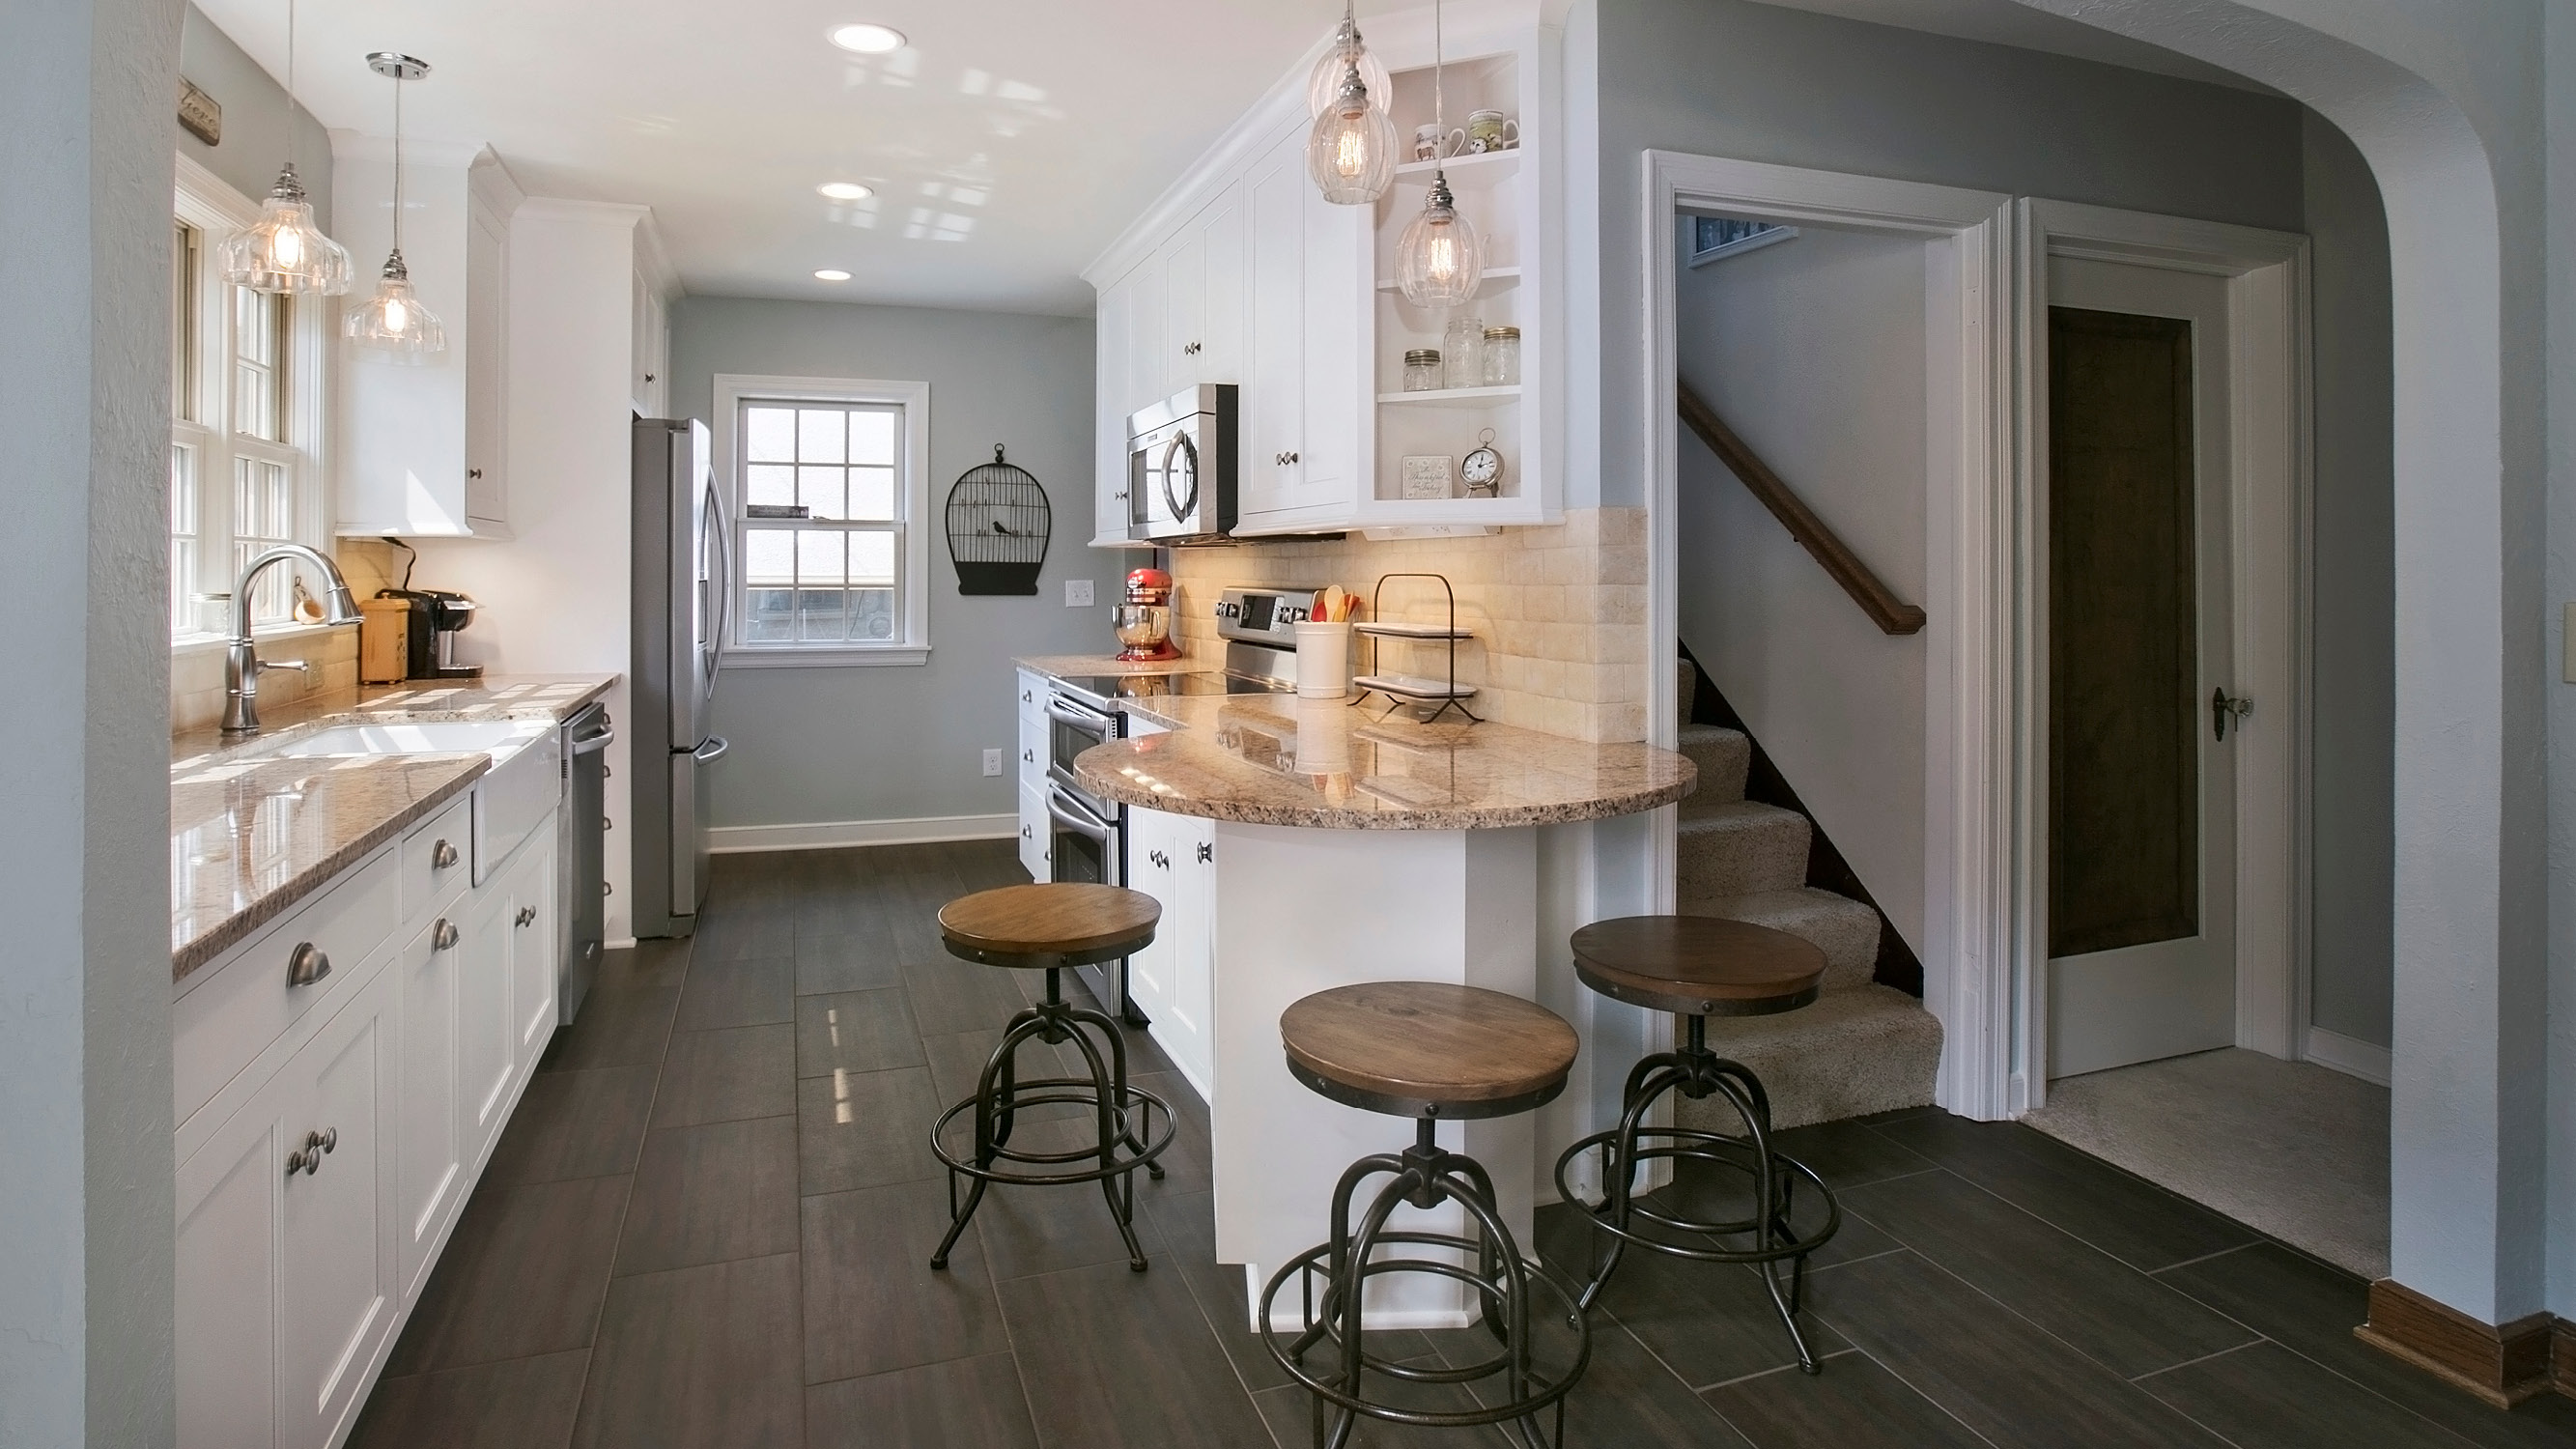 Creative Ways To Add Seating to Your Kitchen - House Lift